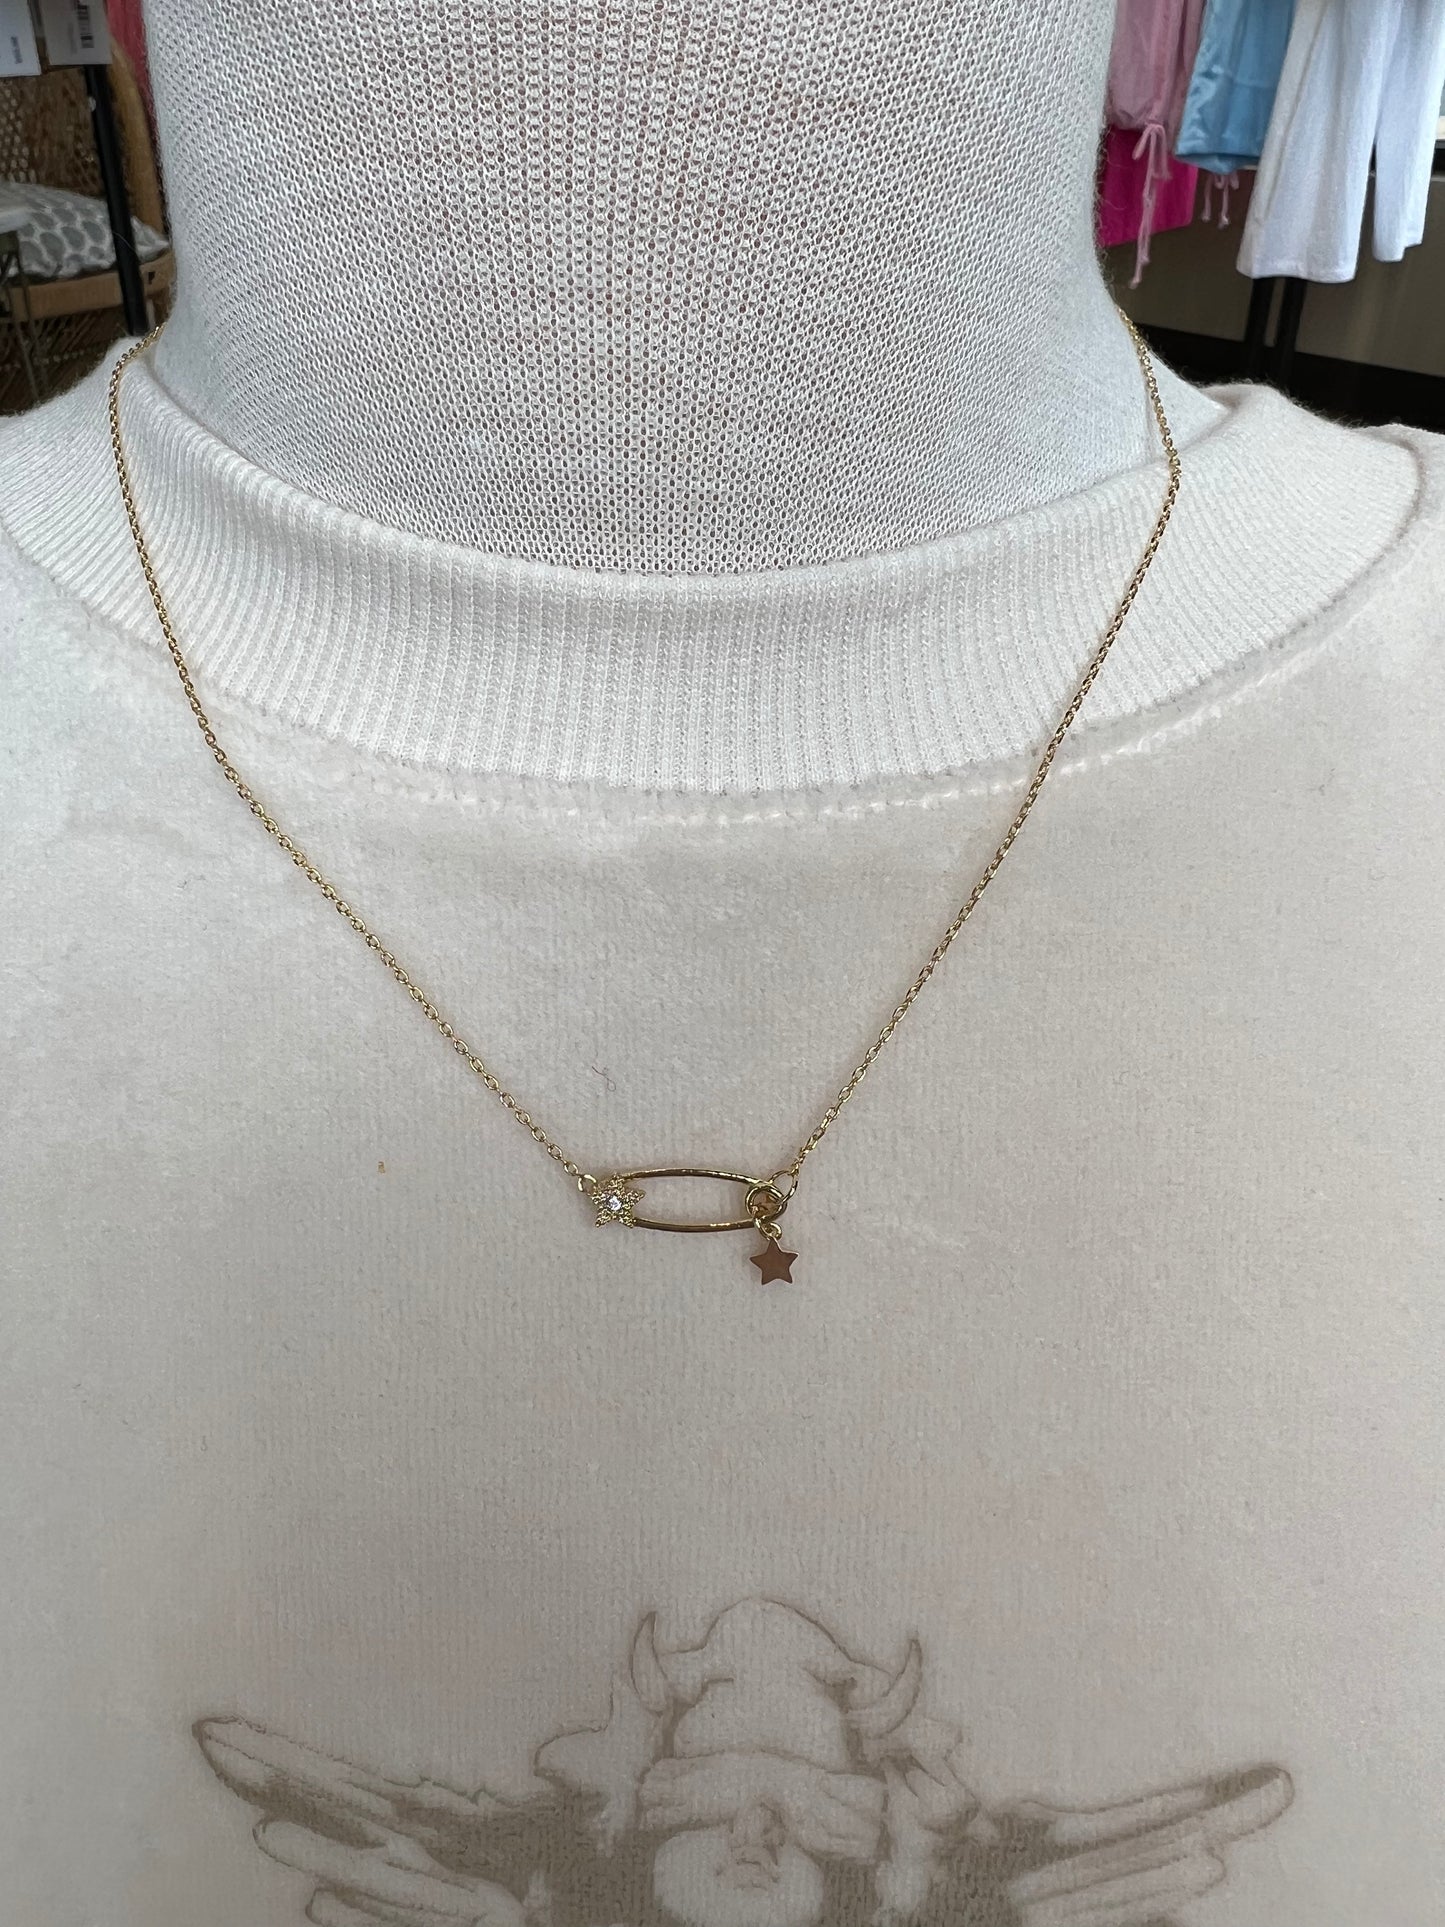 star safety pin necklace